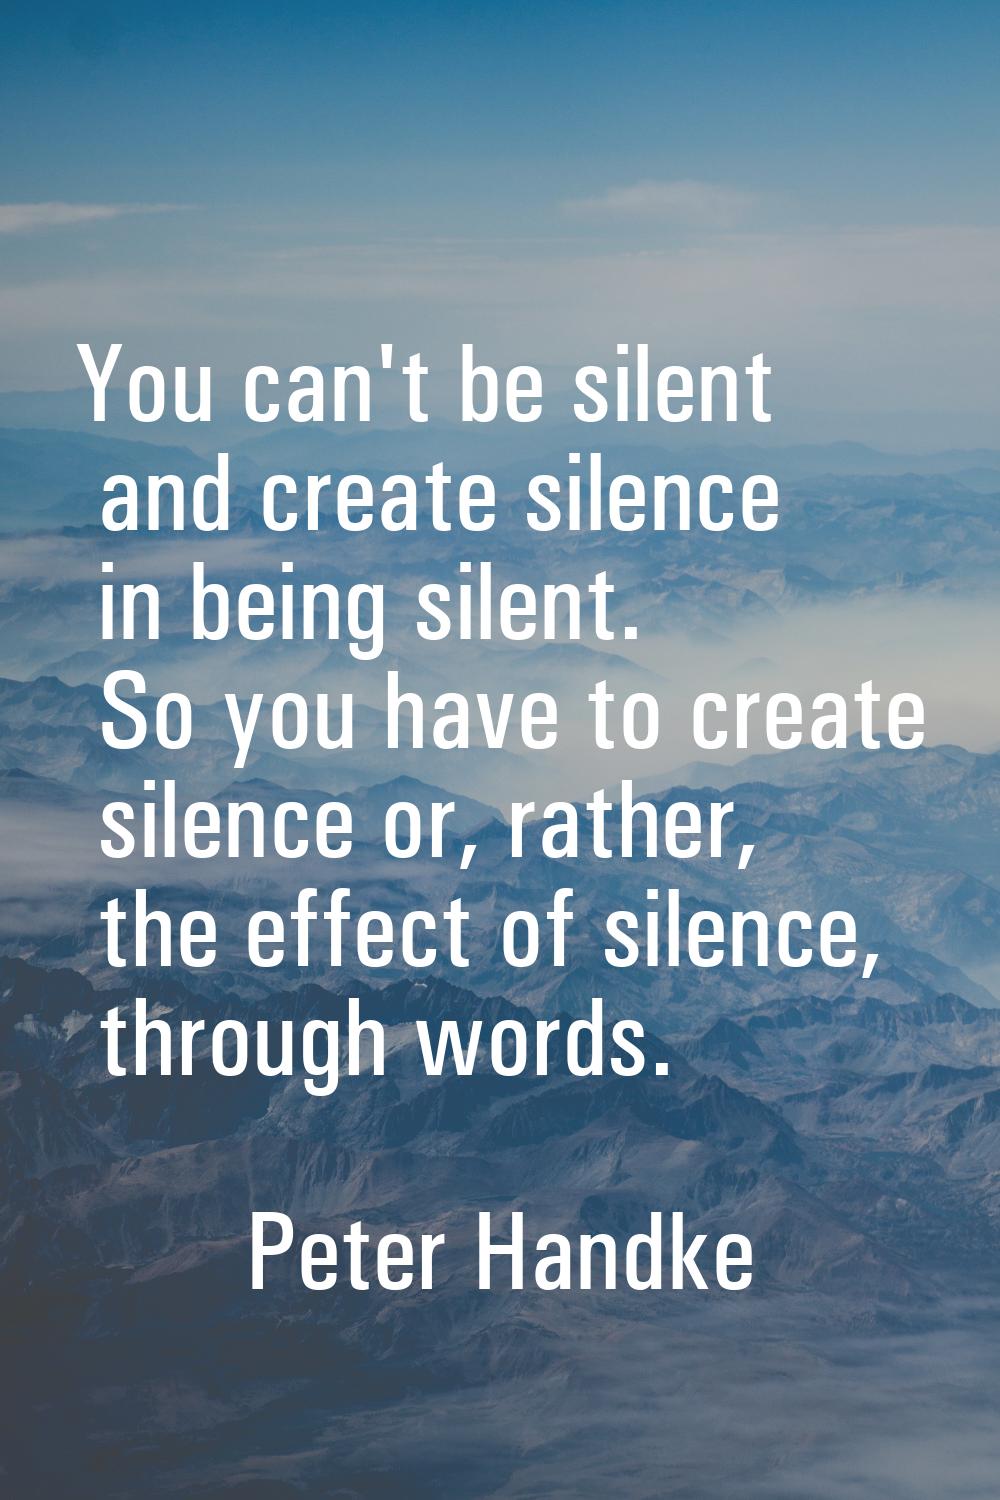 You can't be silent and create silence in being silent. So you have to create silence or, rather, t